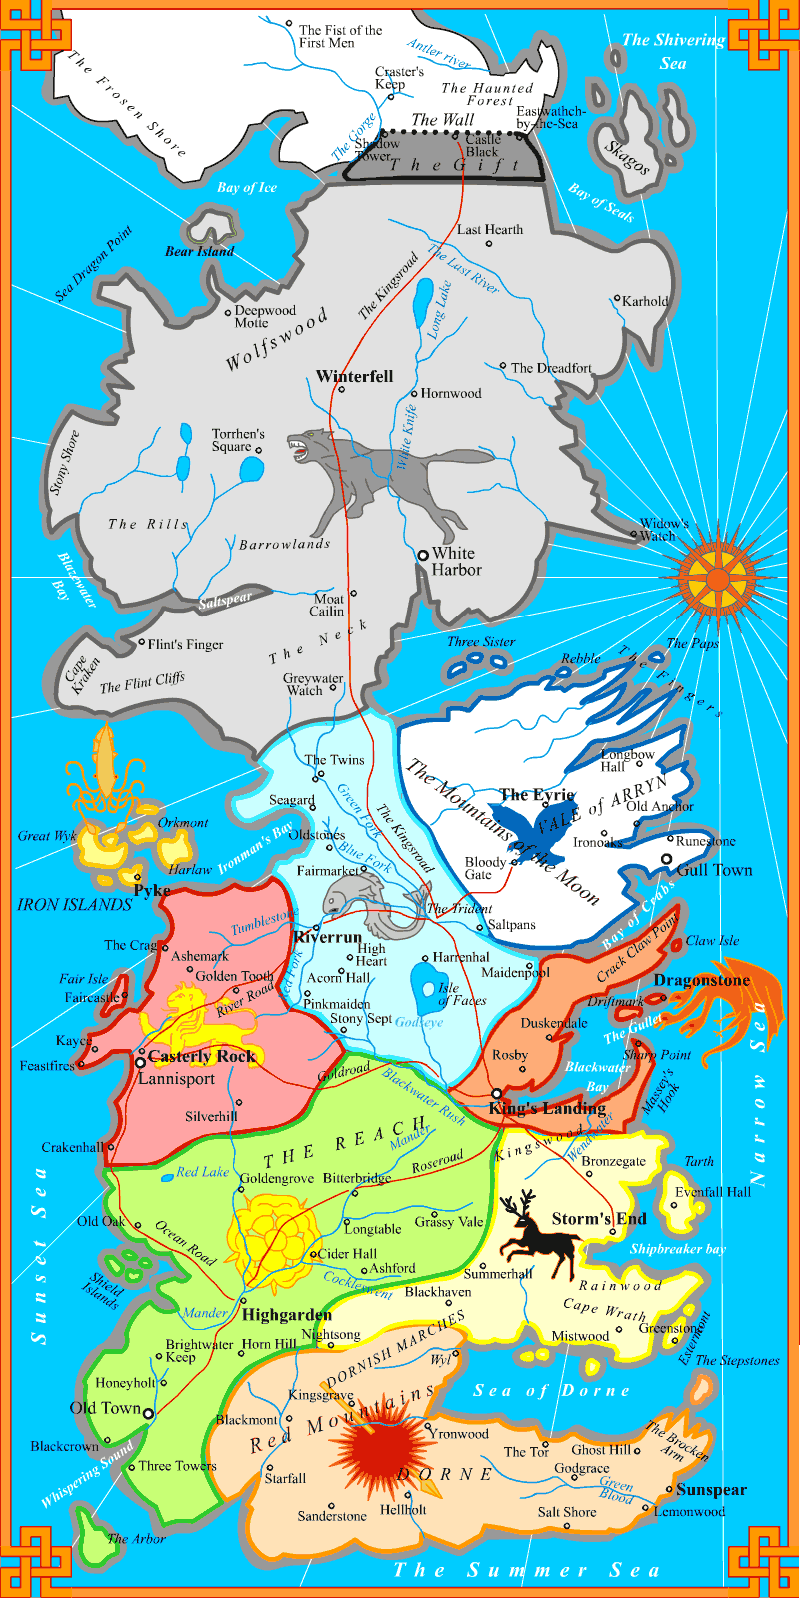 The Maps of Game of Thrones GISetc